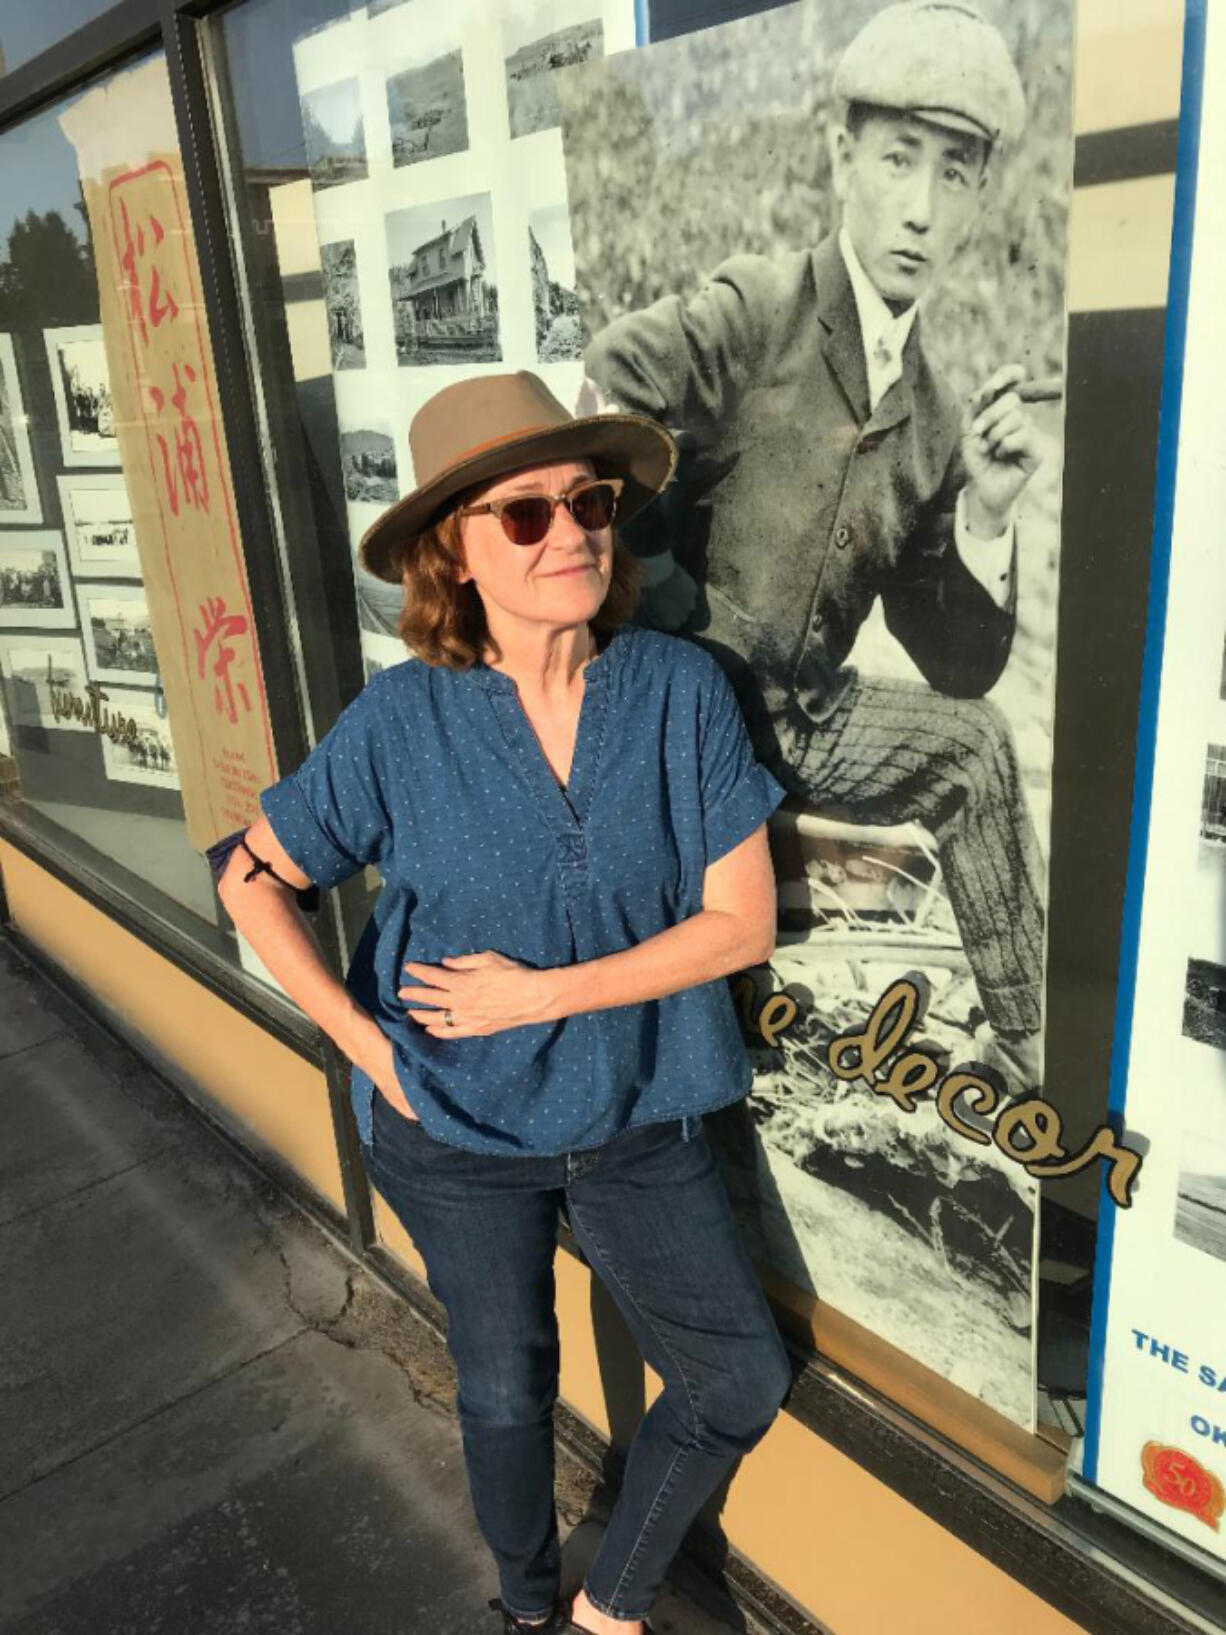 Vancouver filmmaker Beth Harrington is working on a documentary about Frank Matsura, pictured in the photo display next to her.